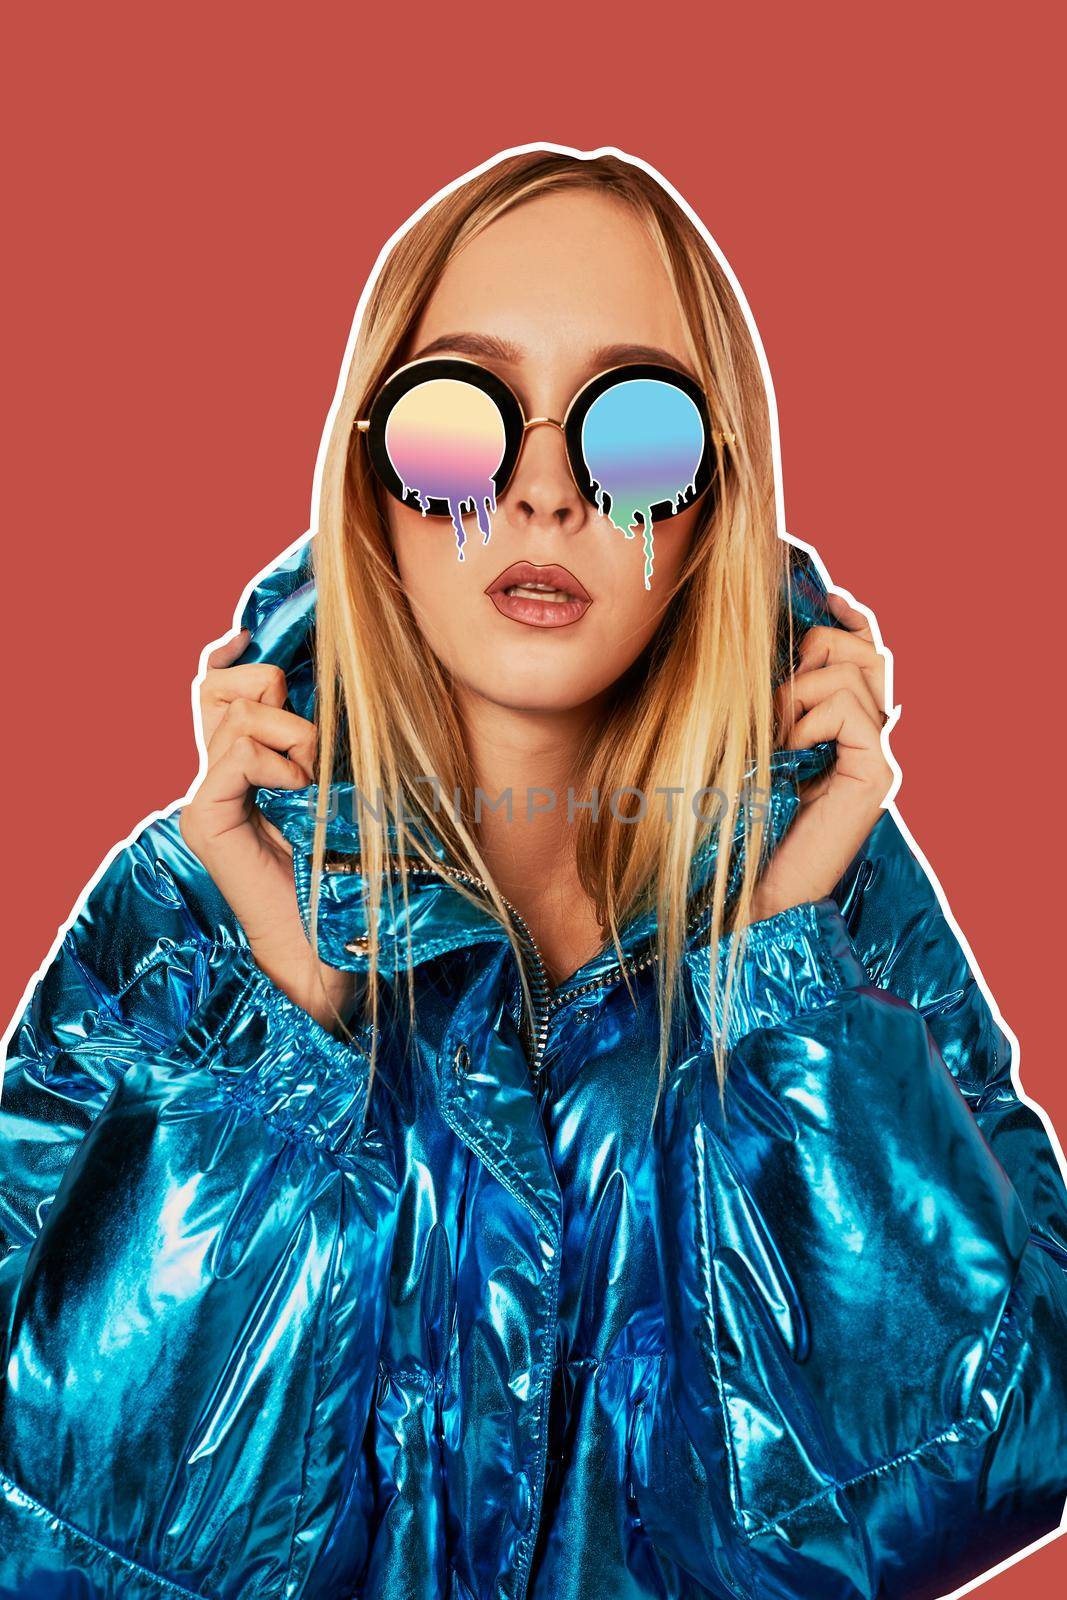 Close-up fashion portrait of an alluring girl in a warm shiny jacket and cartoon melting glasses, holding her hood and posing against a pink background of studio. Art collage.